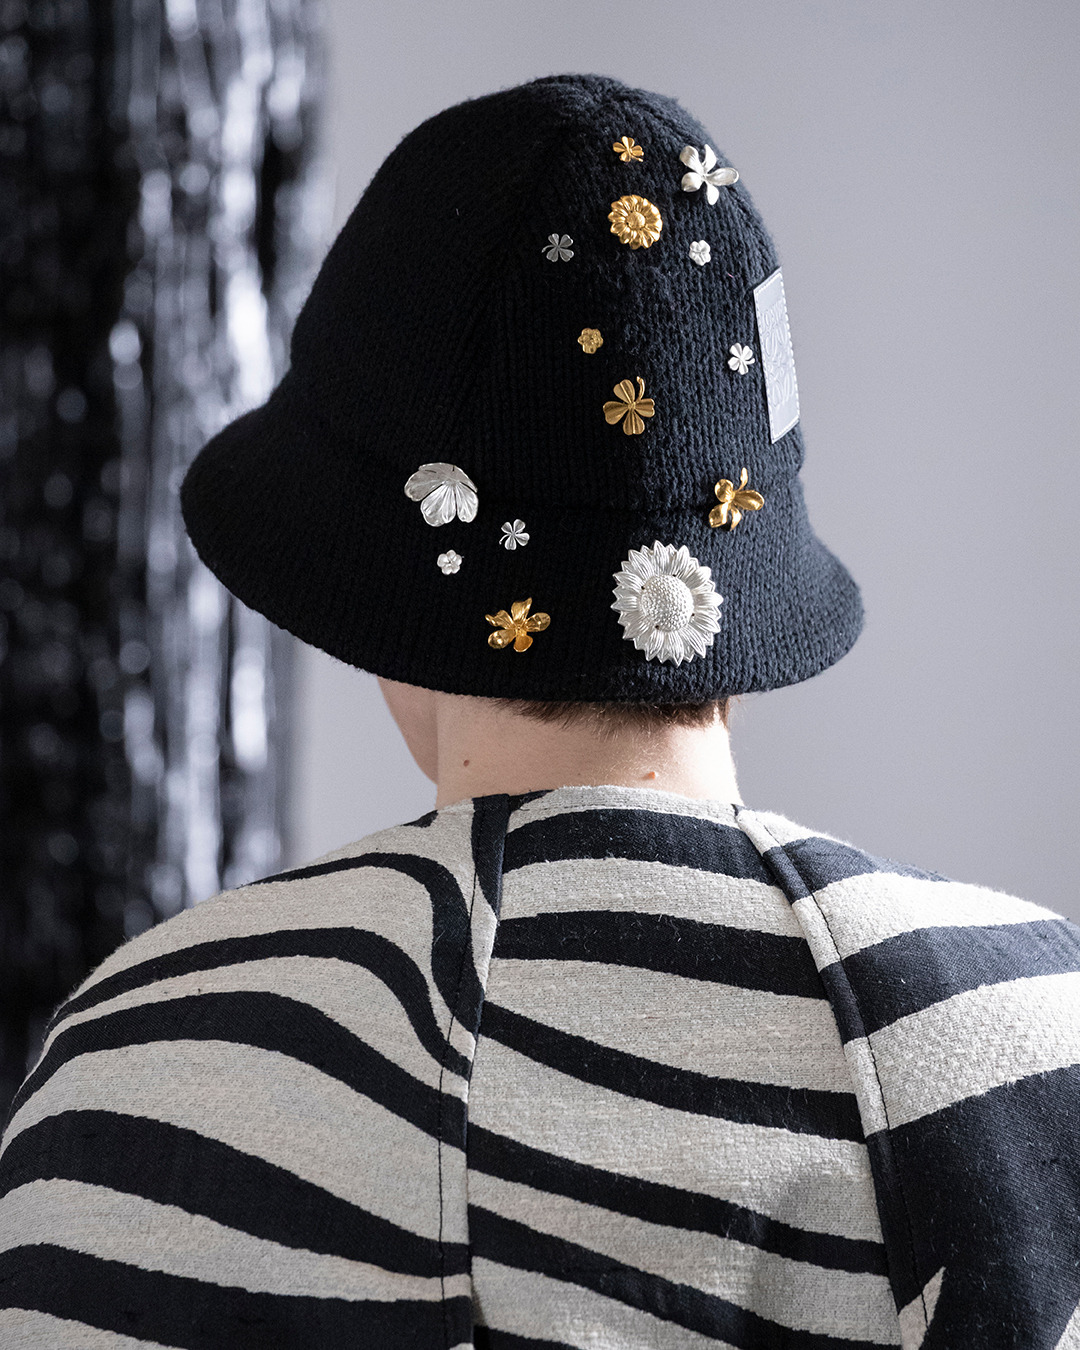 LOEWE - A knitted bucket hat embellished with metallic floral beads and finished with an Anagram leather patch debuted at the LOEWE FW20 Men's show.

Now available on loewe.com

#LOEWE #LOEWEFW20